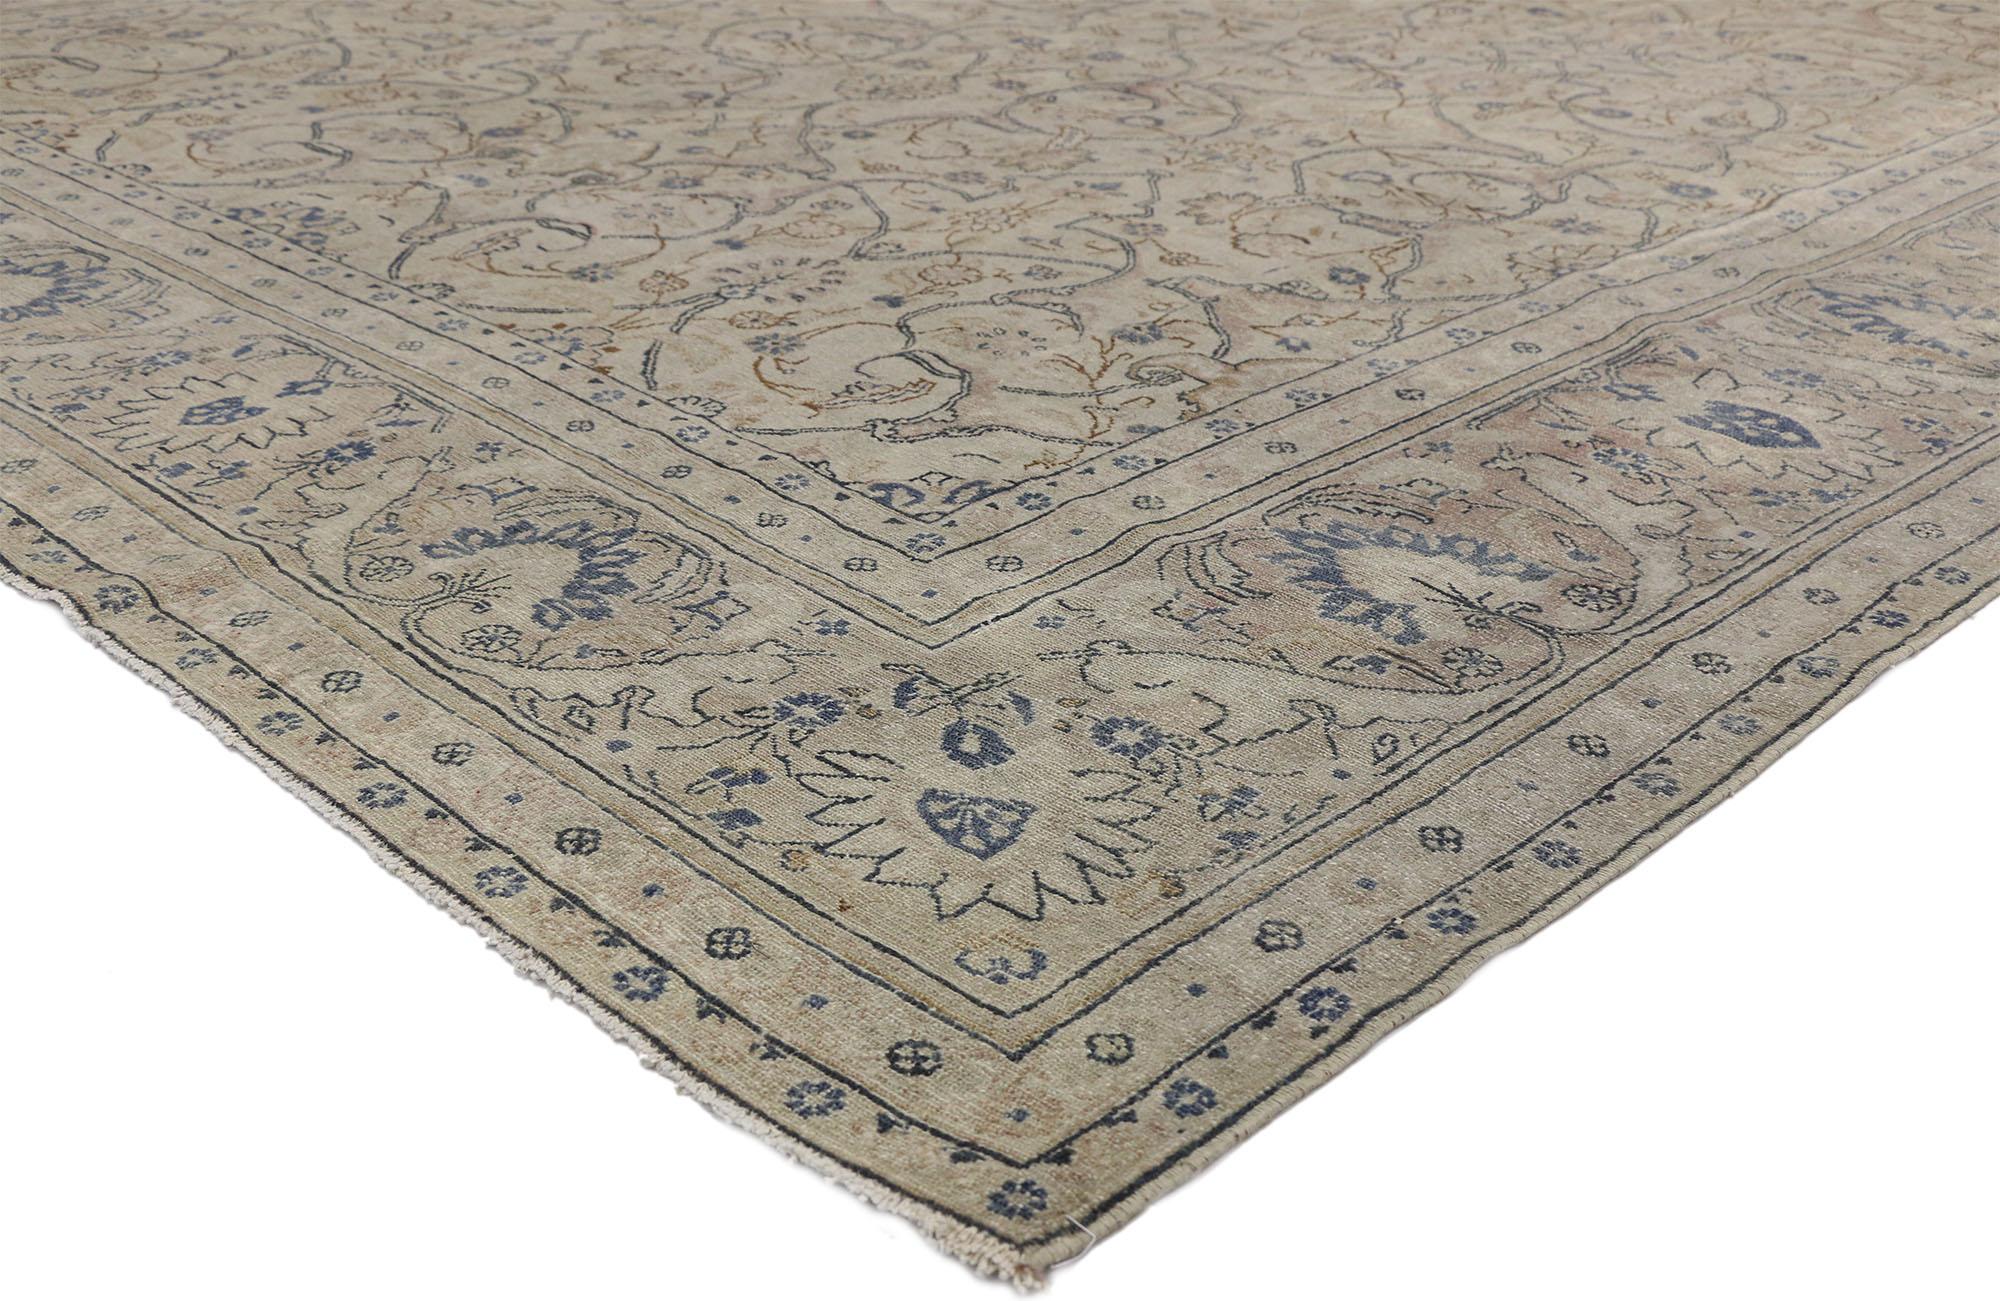 52452 Antique Persian Malayer rug with Dutch Renaissance and European style. With architectural elements of curved lines and a subdued color scheme, this hand knotted wool antique Persian Malayer rug embodies a combination of Dutch Renaissance and